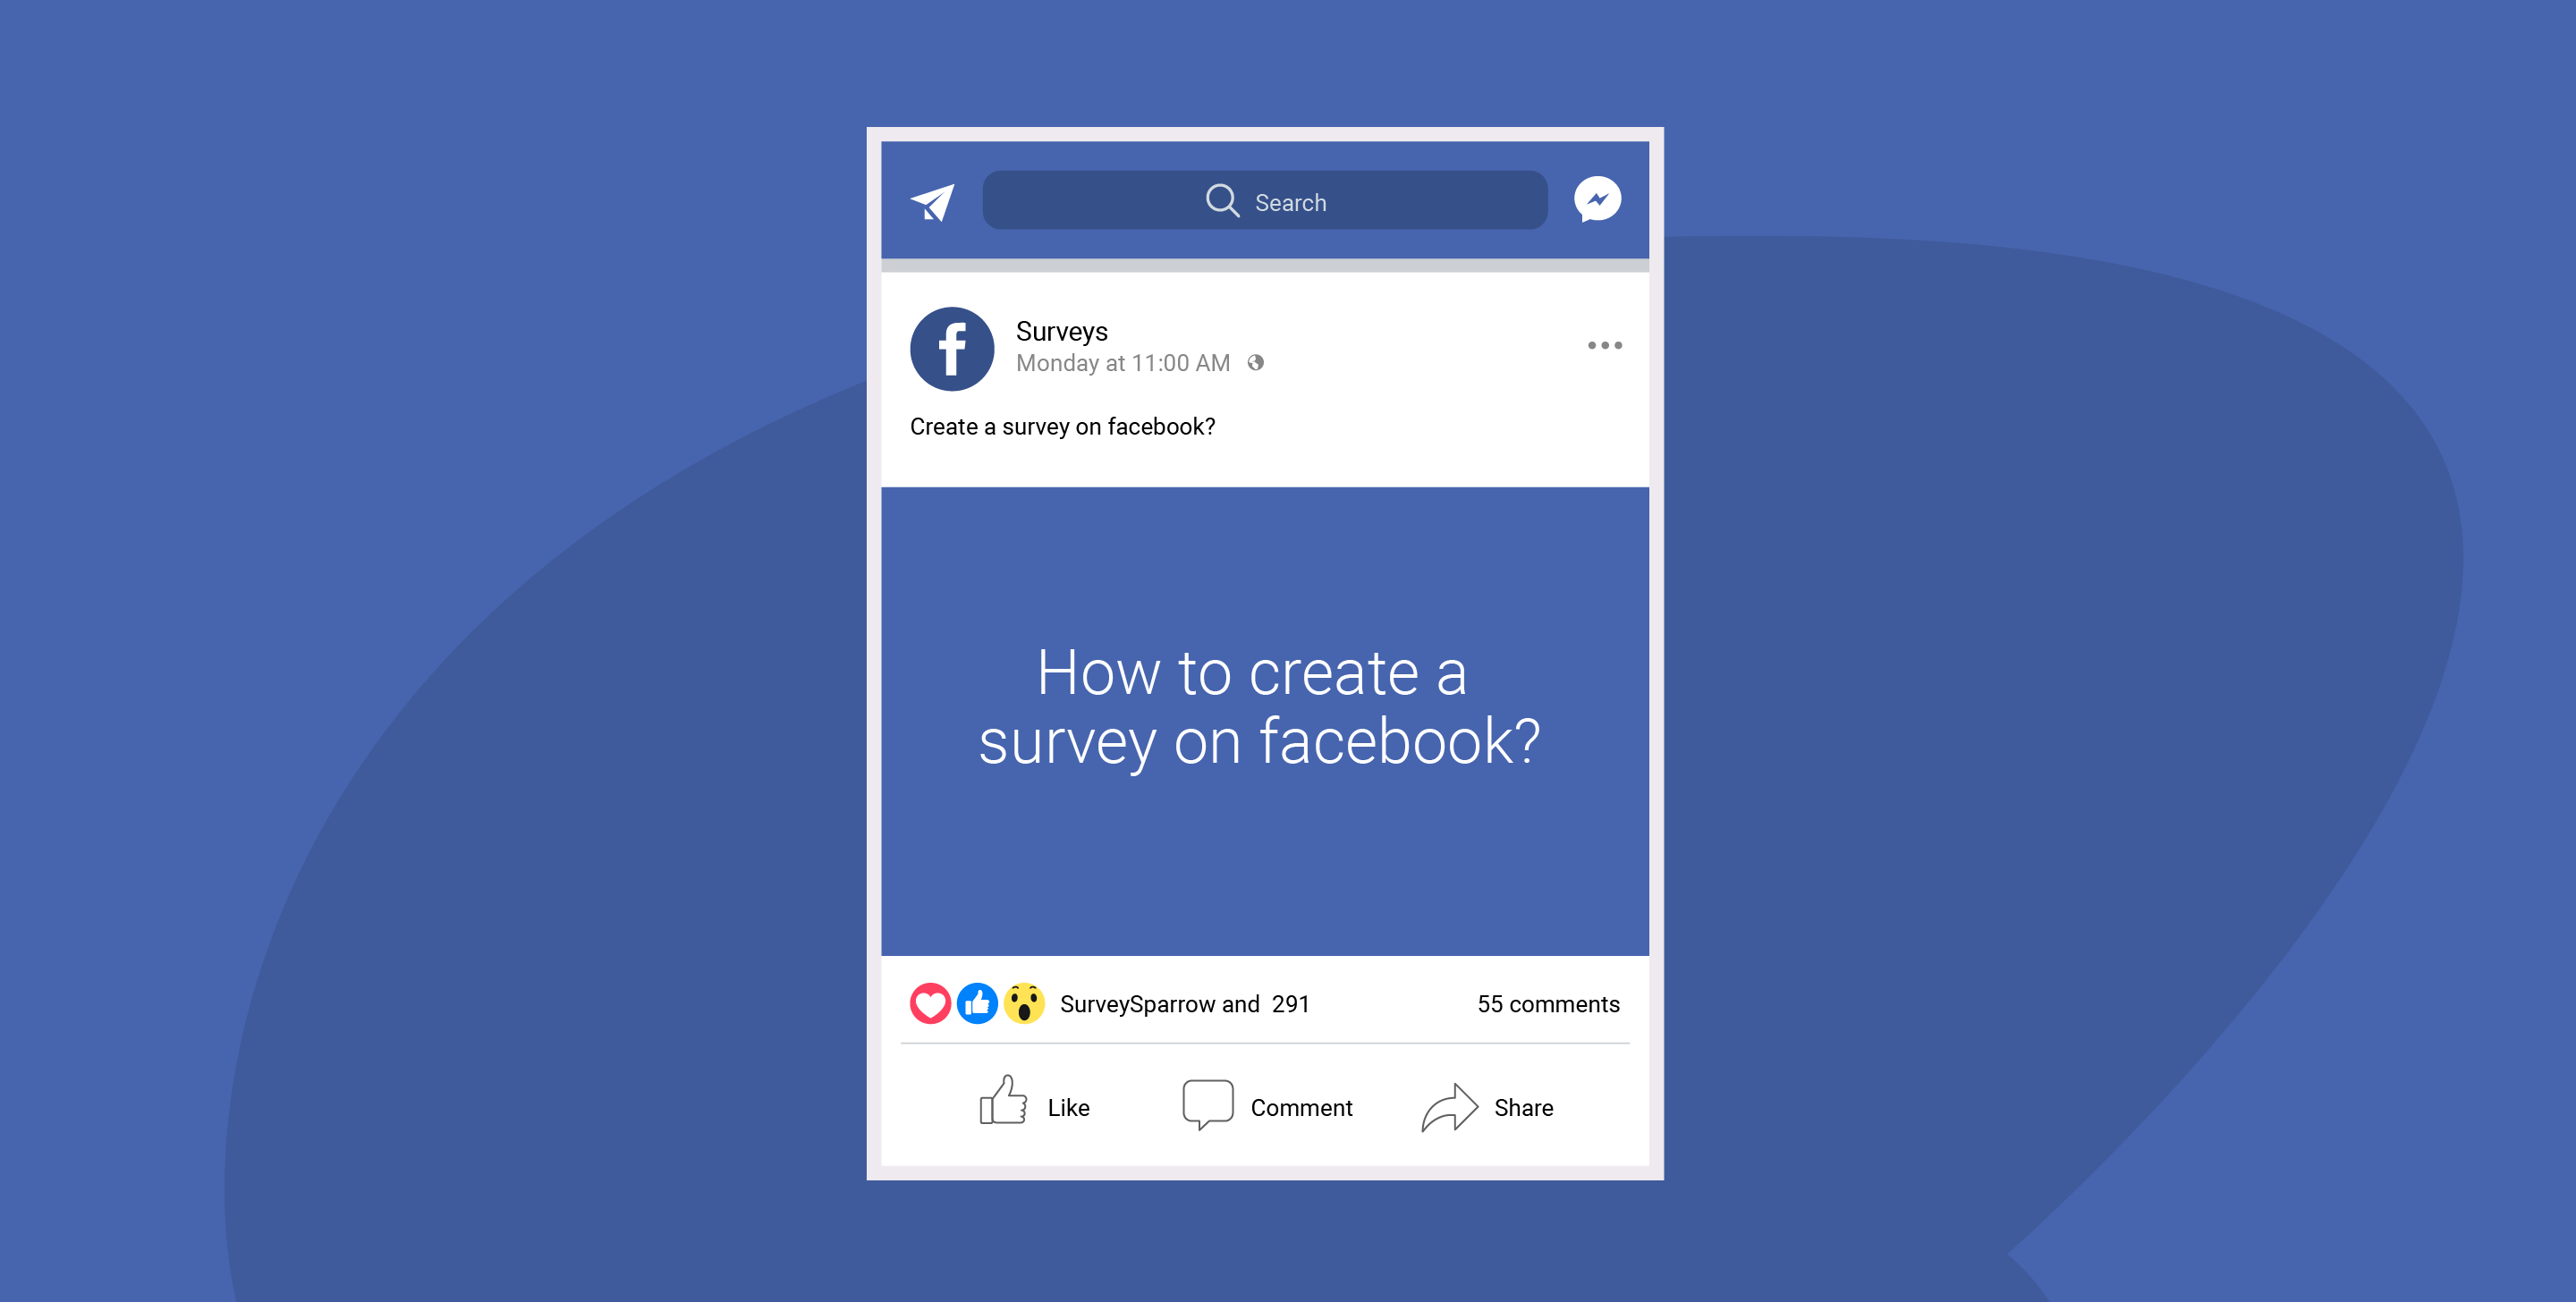 How to Create & Set Up a Facebook Pixel The Right Way in 2023